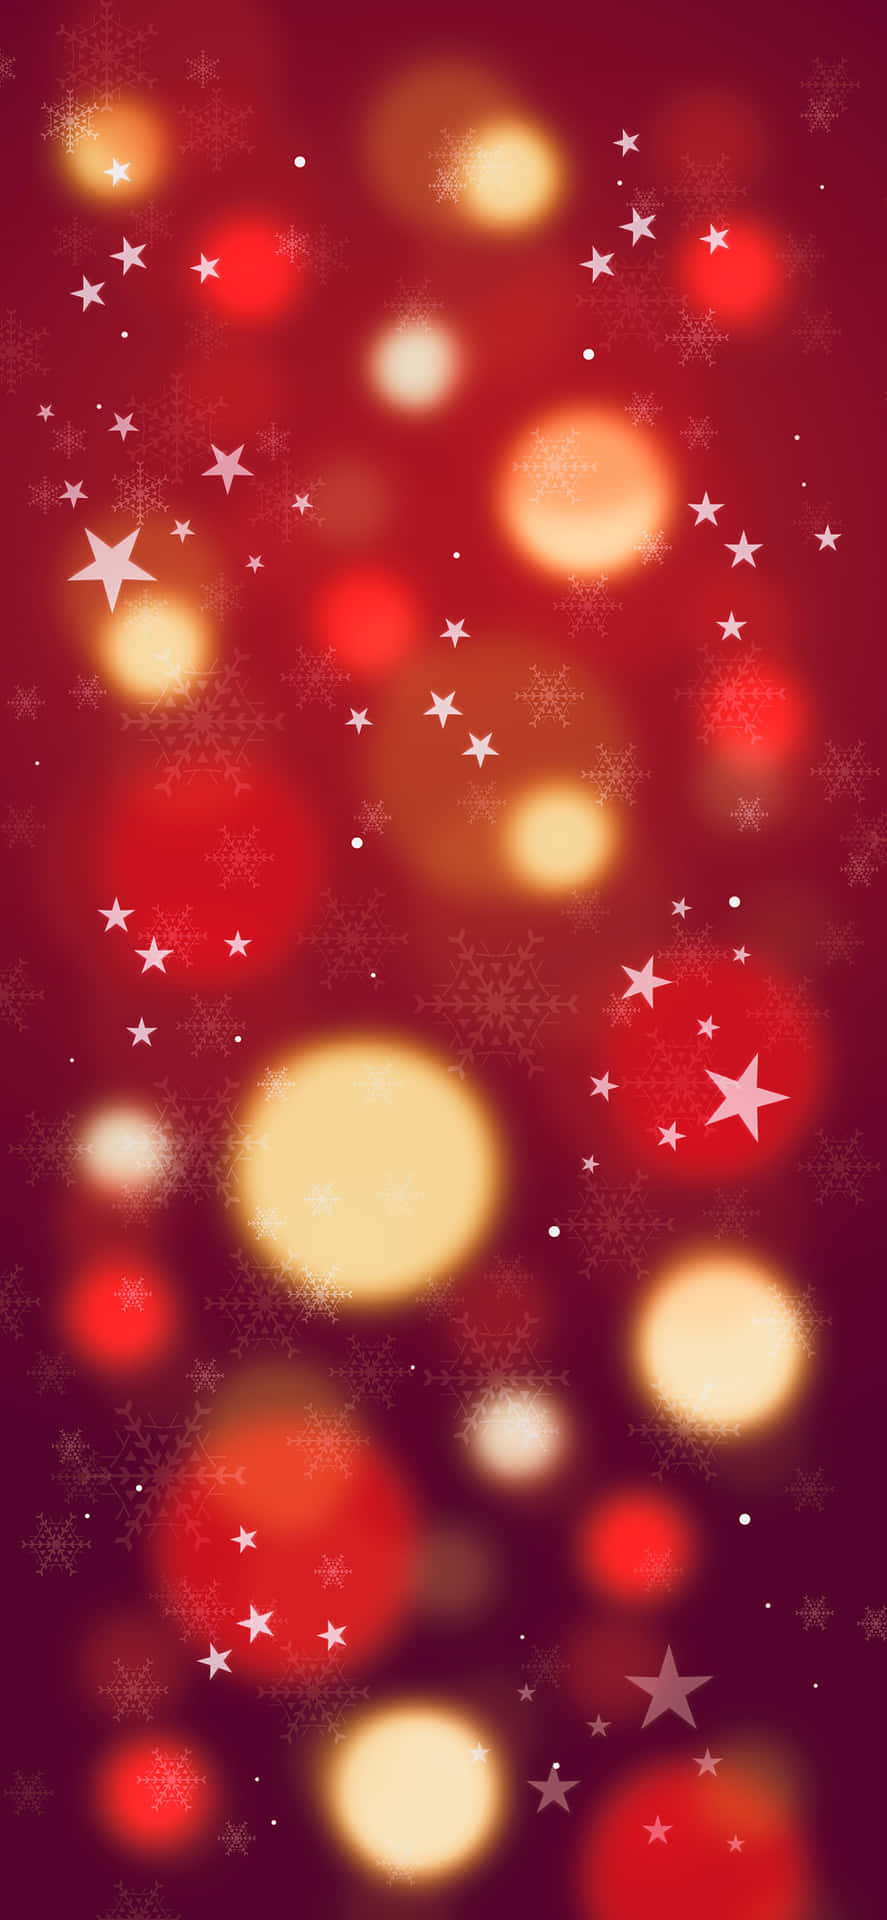 “The perfect gift for the holidays- a Red Christmas iPhone!” Wallpaper